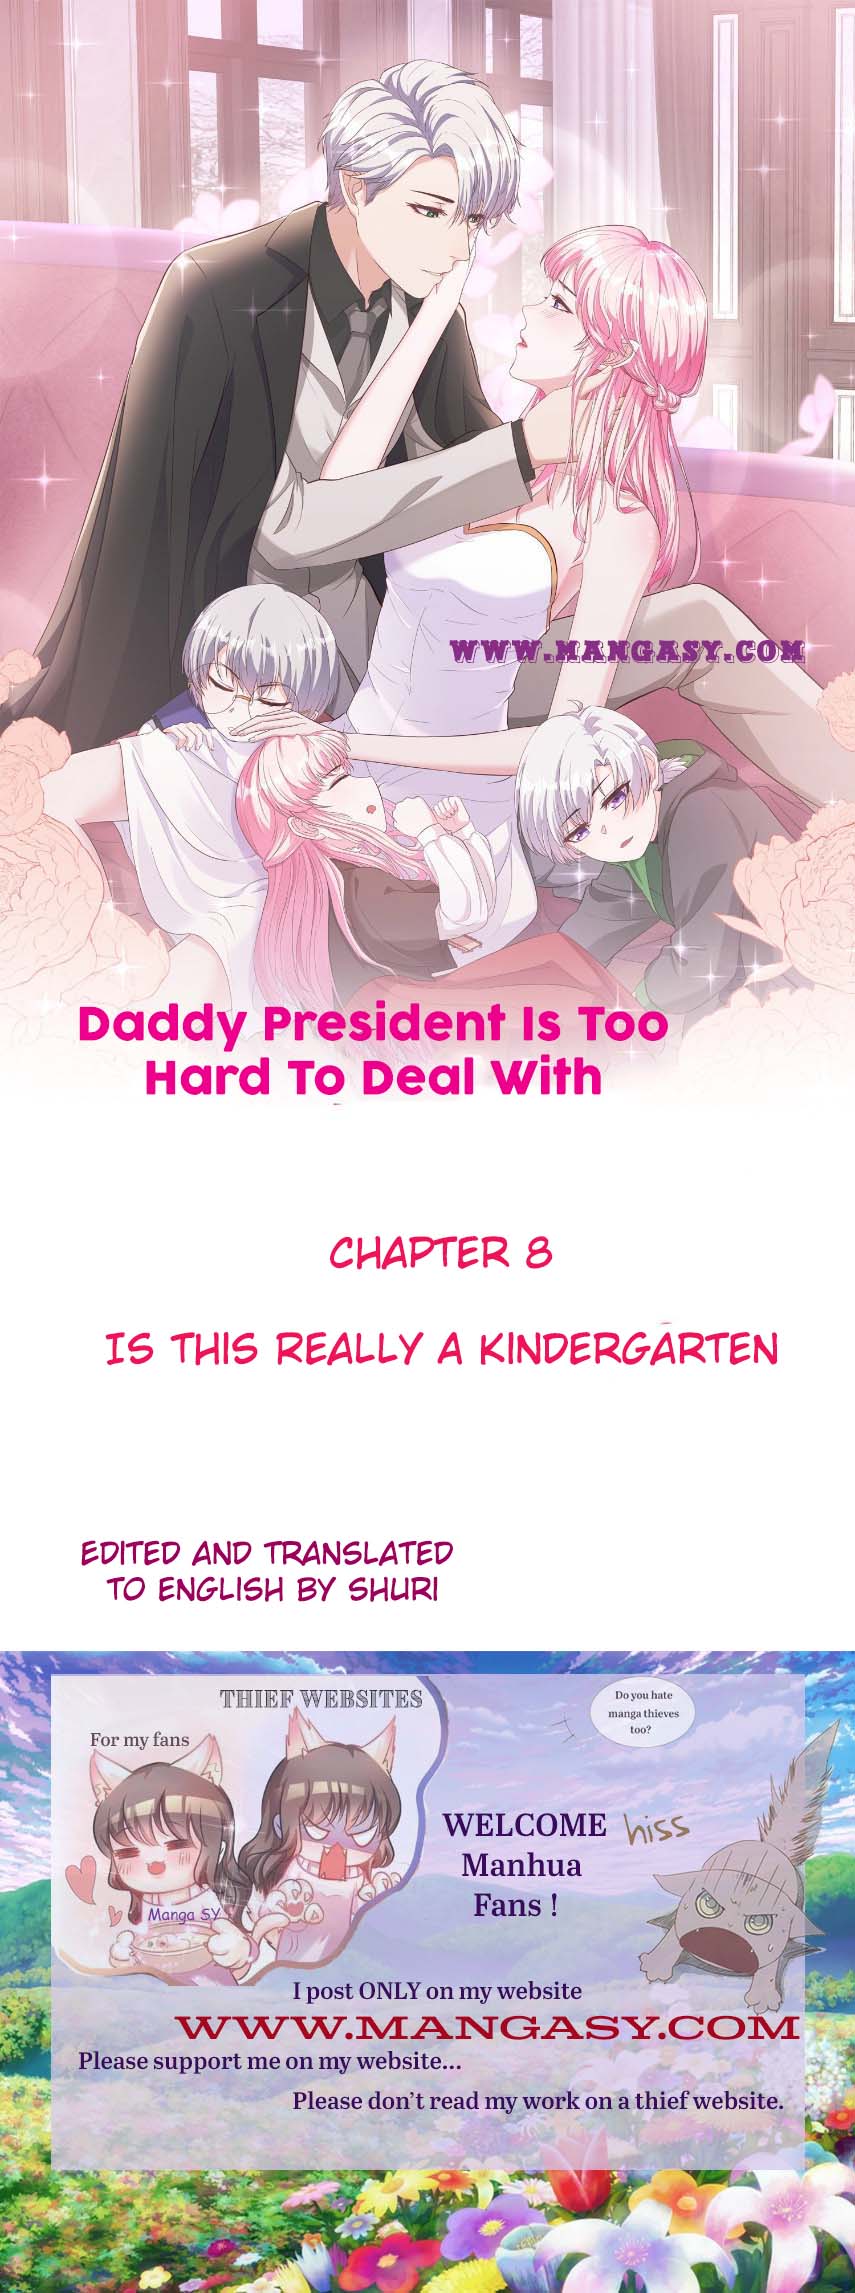 Daddy President Is Too Hard To Deal With - Page 2